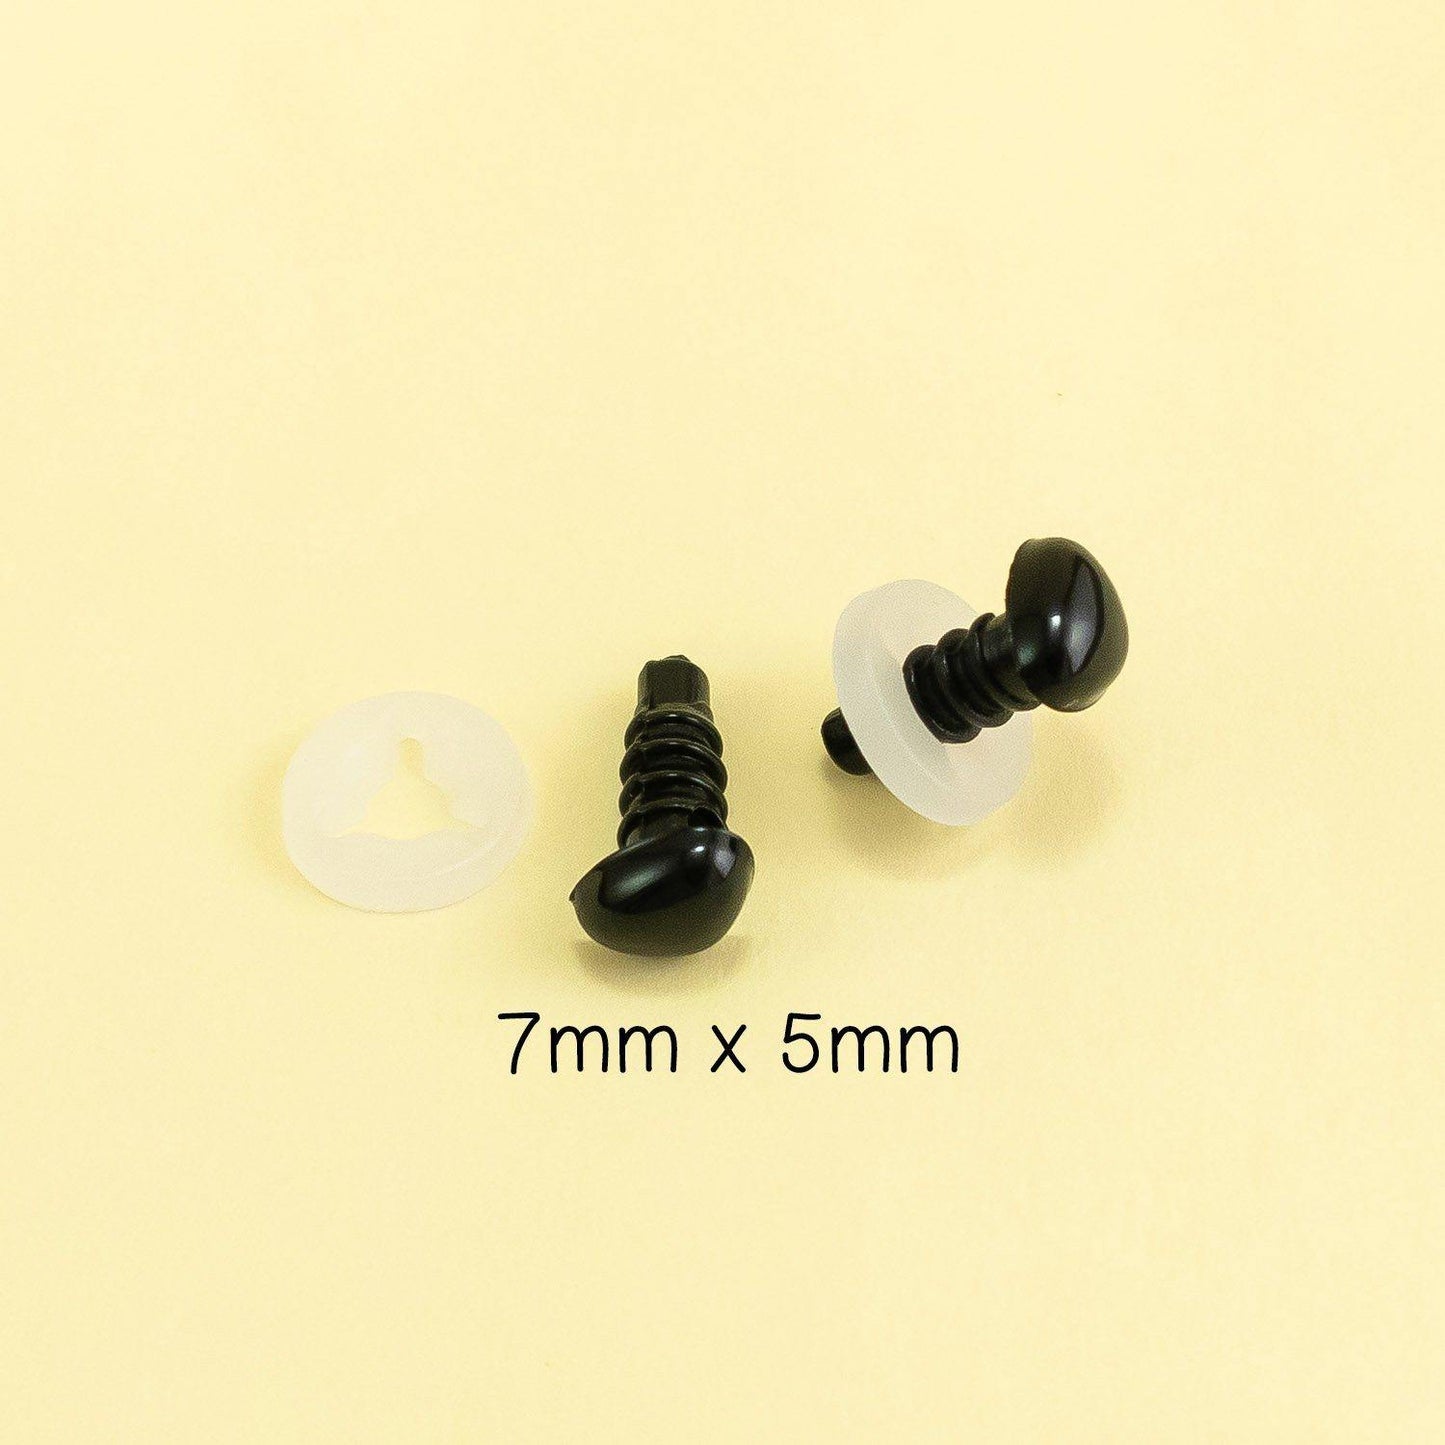 7mm x 5mm Black triangle safety noses for teddy bears